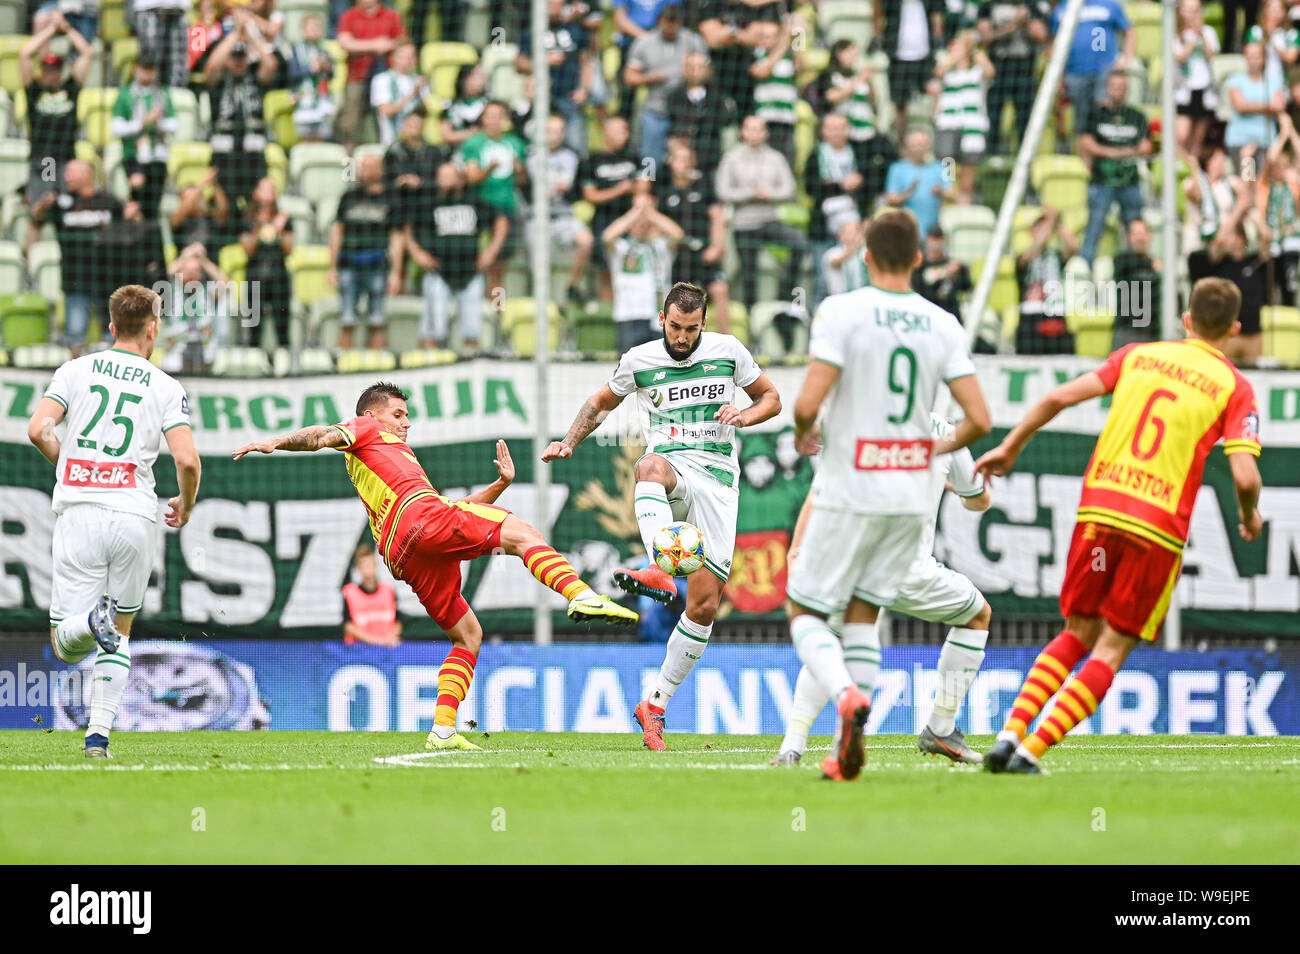 Patryk Klimala from Jagiellonia Bialystok (L) and Blazej Augustyn from Lechia Gdansk (R) are seen in action during the PKO Ekstraklasa League match between Lechia Gdansk and Jagiellonia Bialystok.(final score; Lechia Gdansk 1:1 Jagiellonia Bialystok). Stock Photo